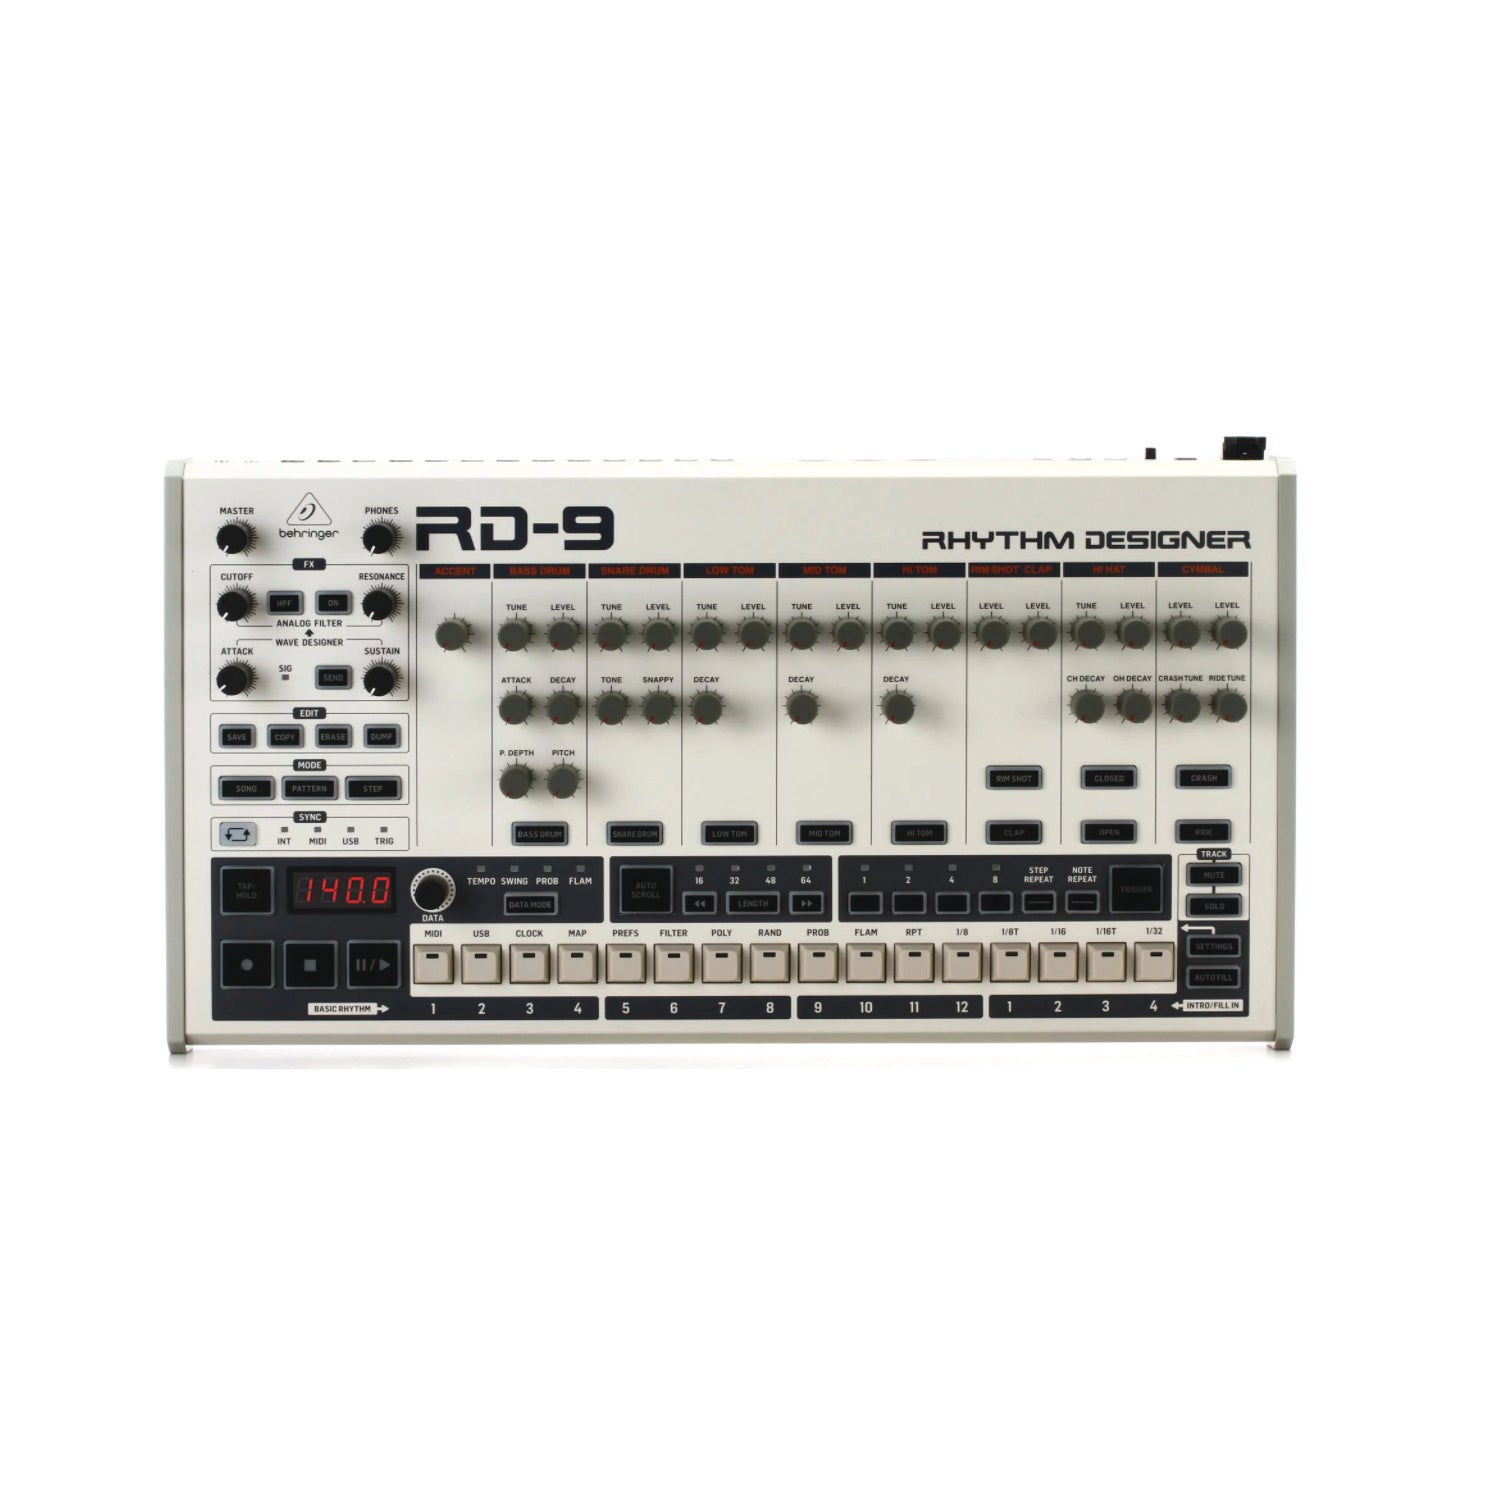 Stand by for the new Behringer RD-9 Rhythm Designer to ship out